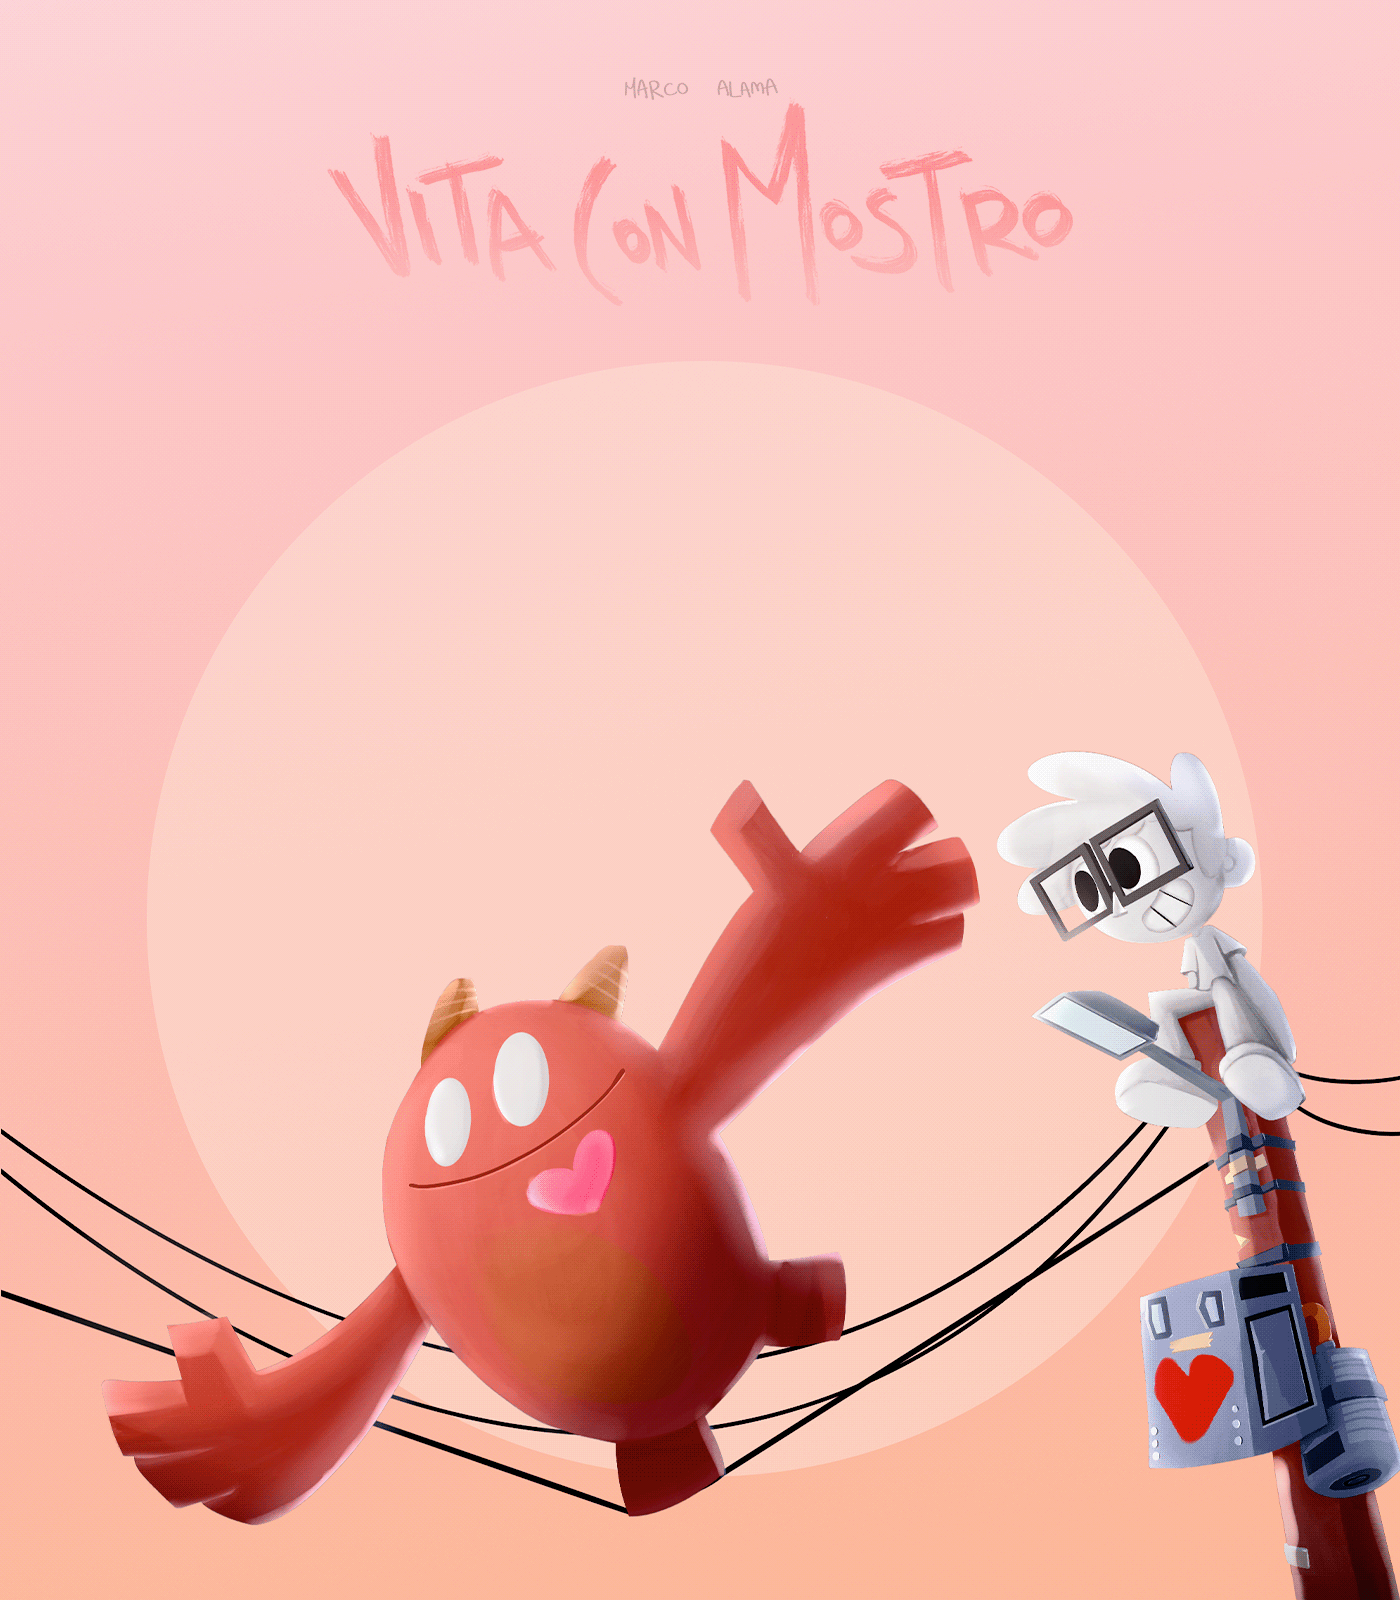 Mostro and Barco sitting on a wire